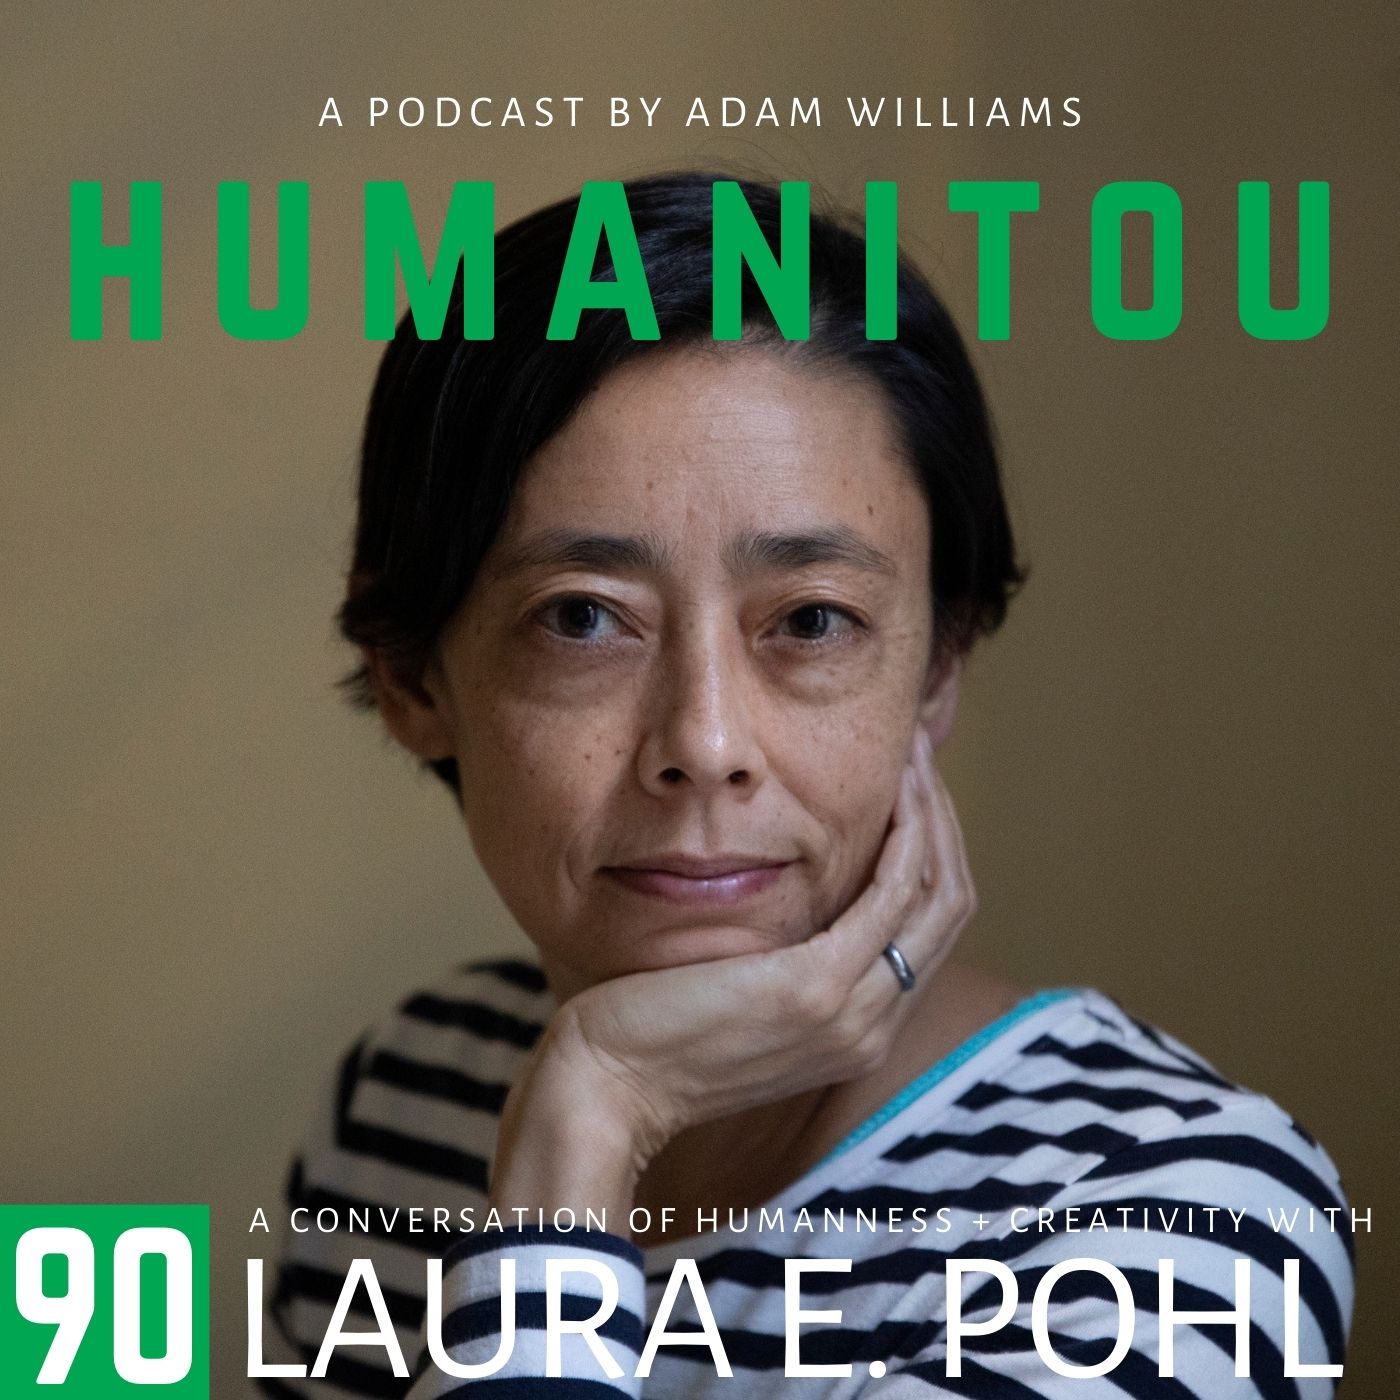 90: Laura Elizabeth Pohl, humanitarian storyteller, on starting over and advocating through photography and film